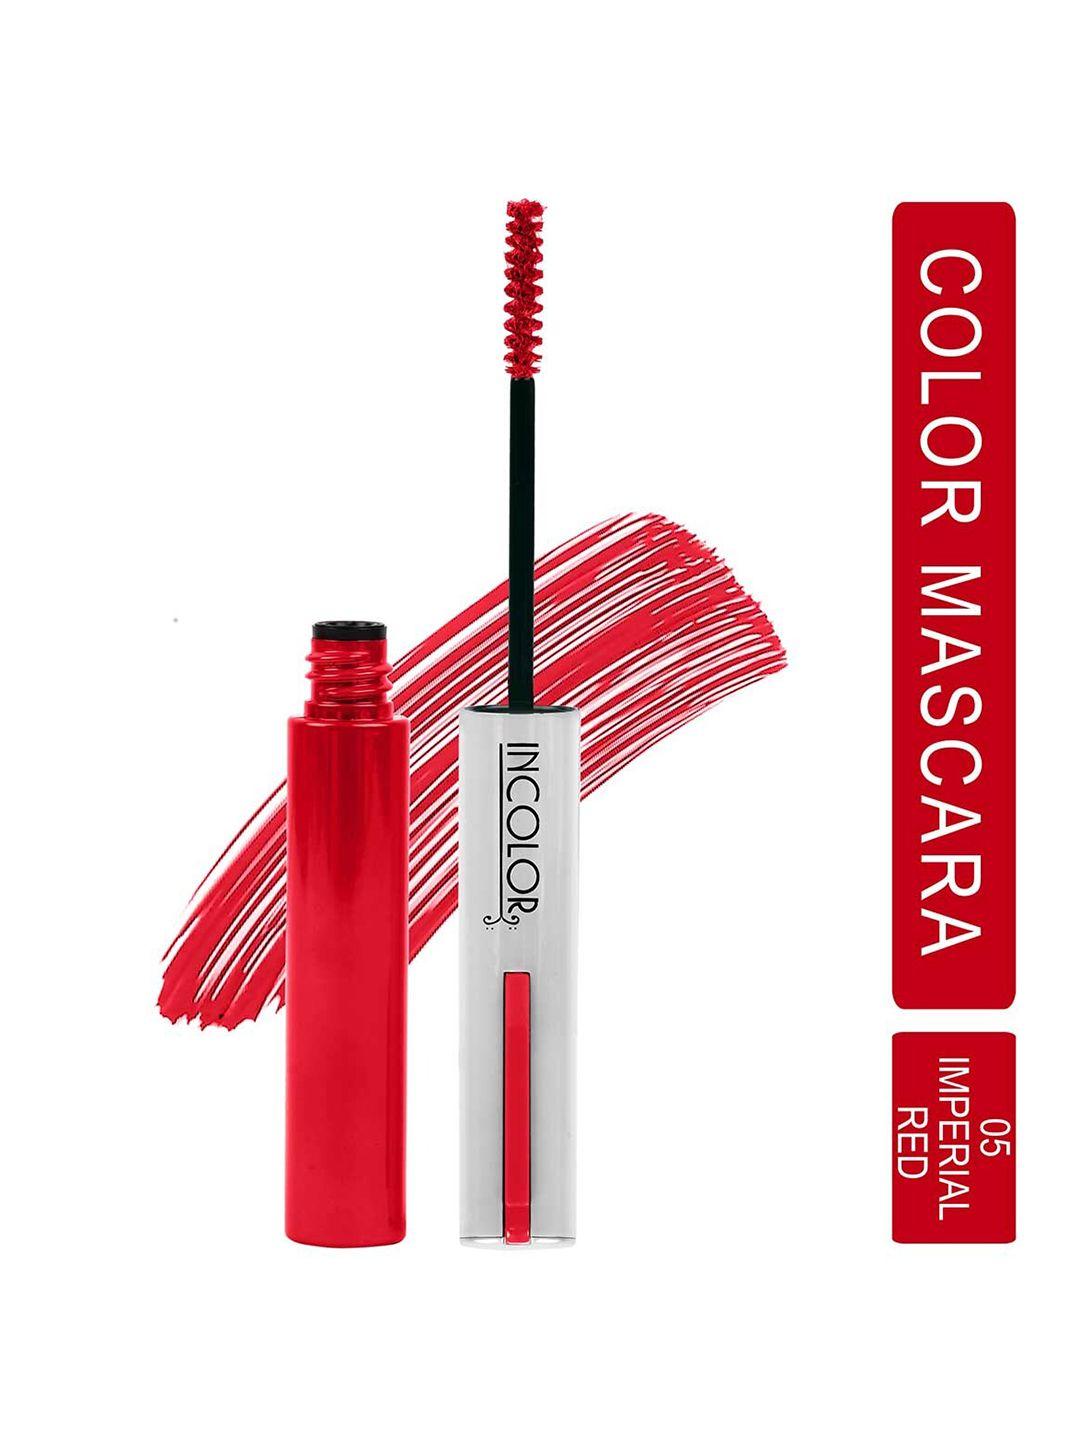 incolor eye makeup long lasting color mascara 6 ml - imperial red 05